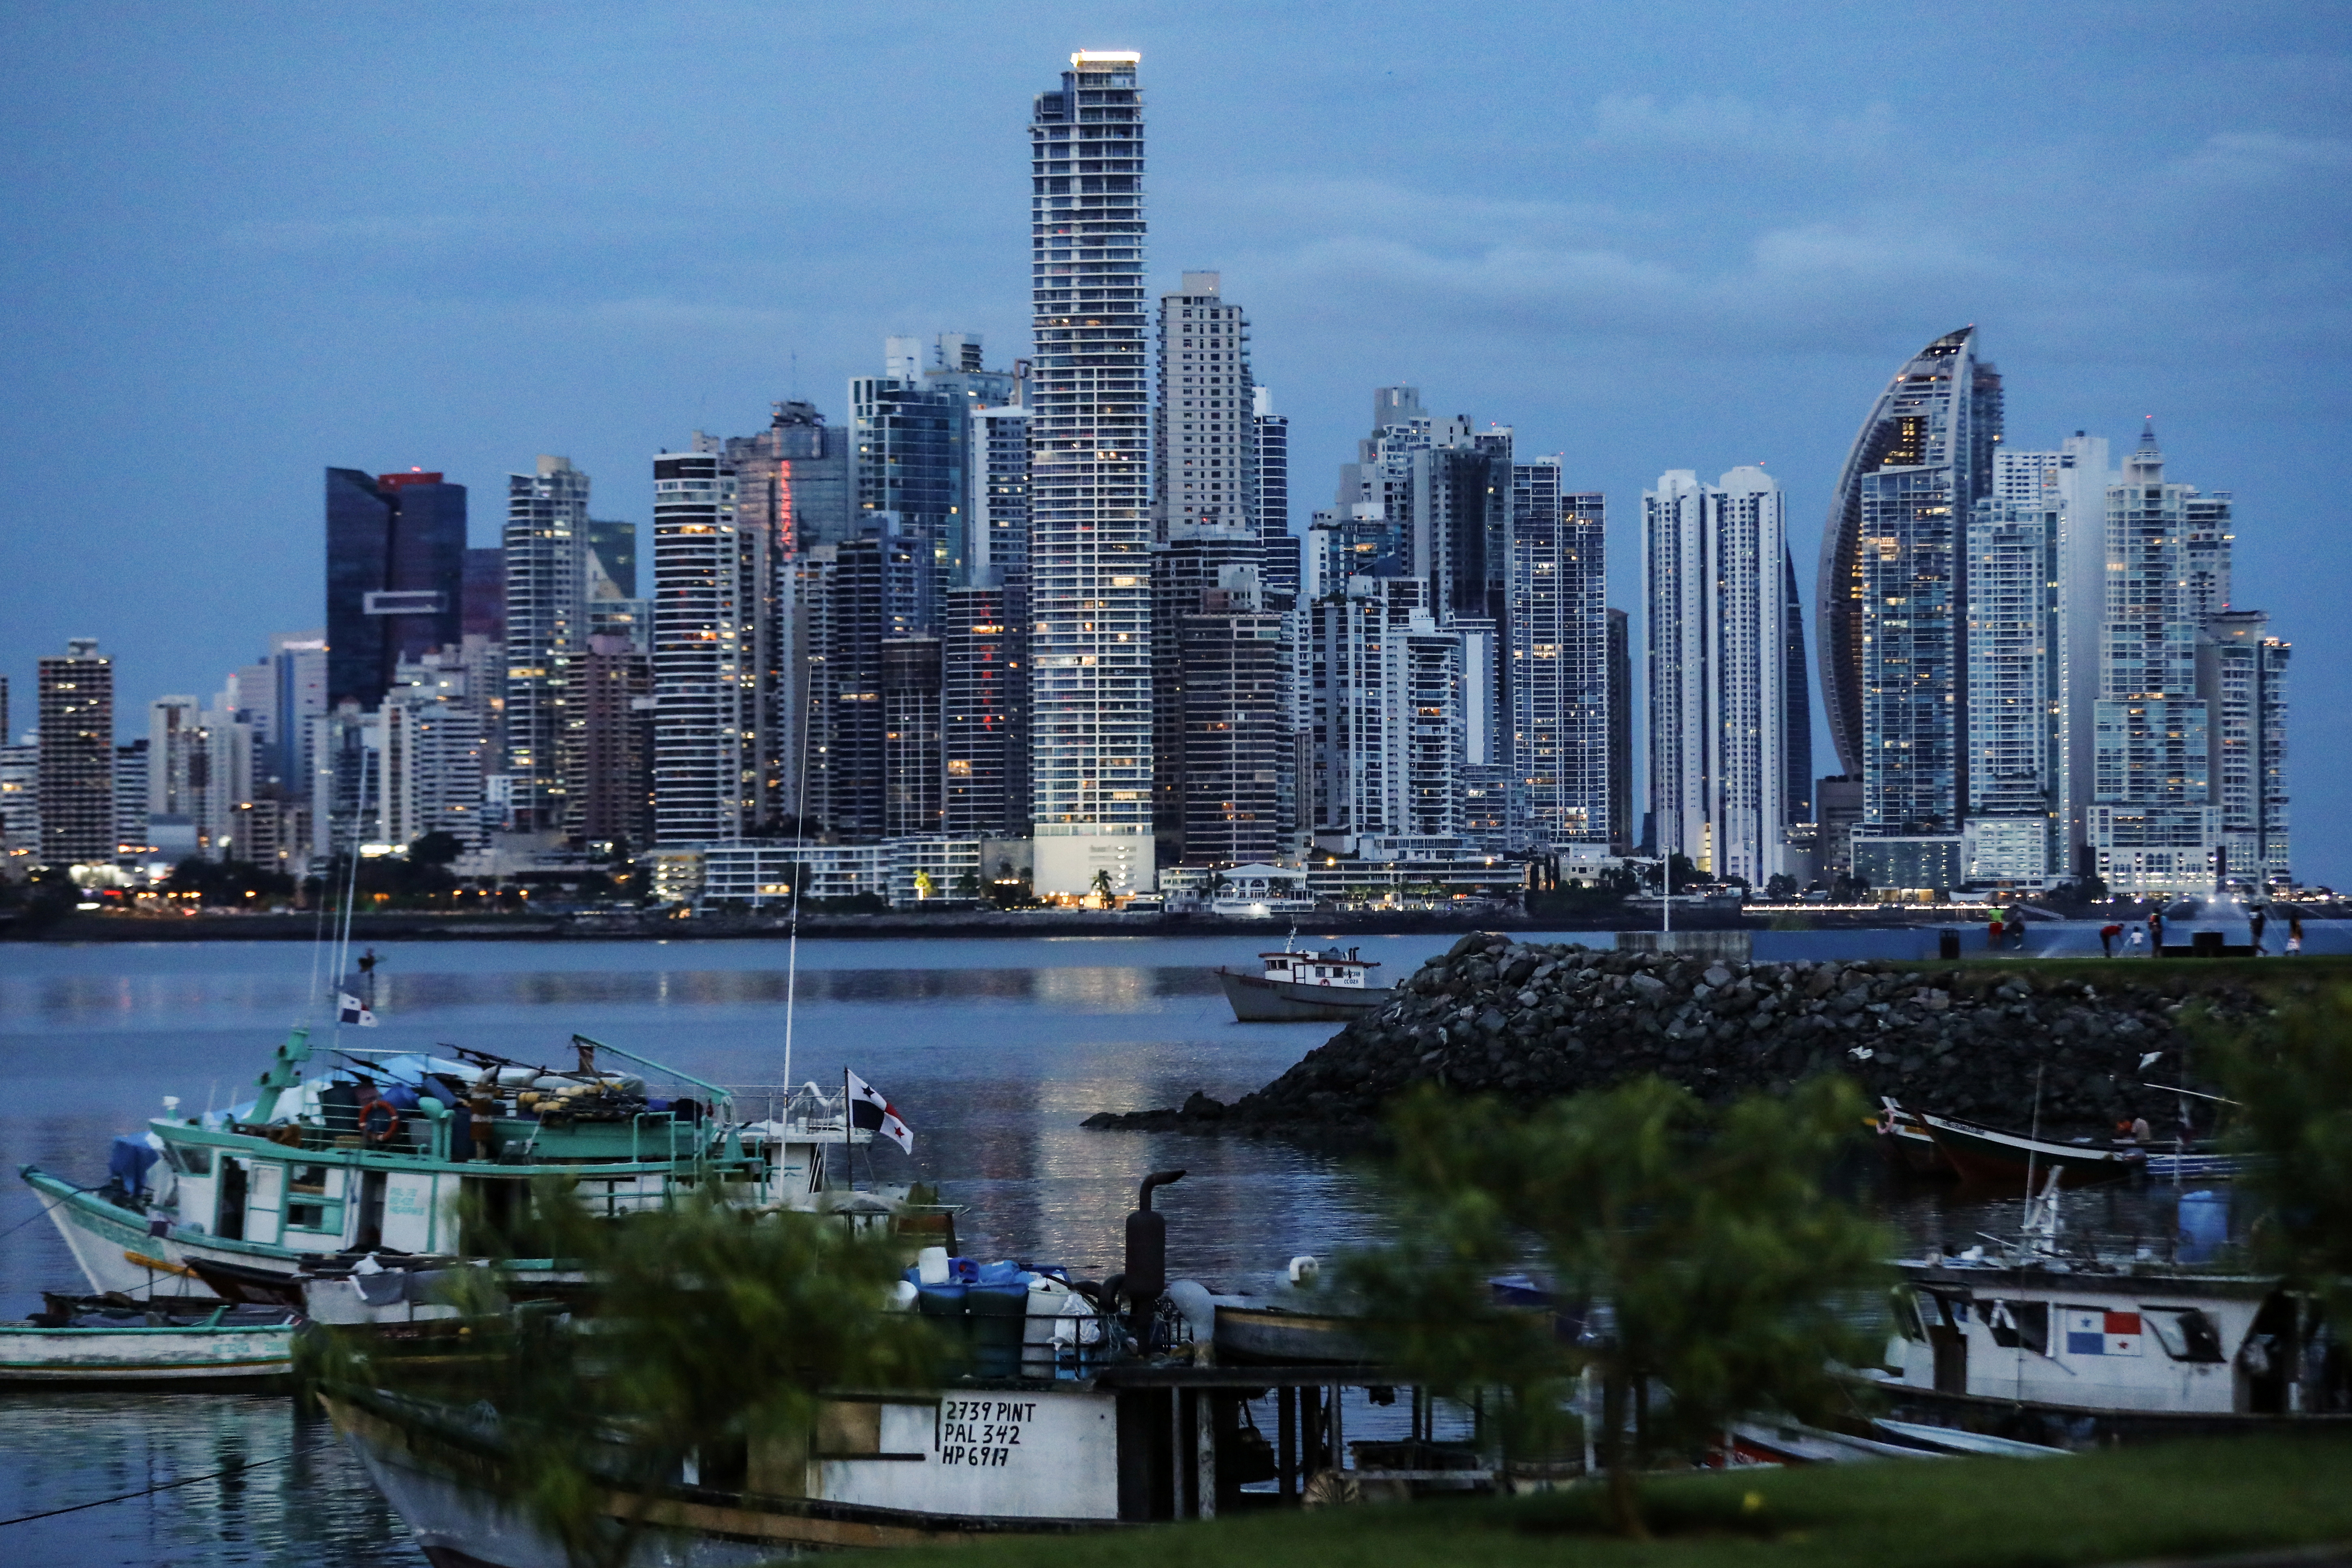 A general view shows buildings in Panama City